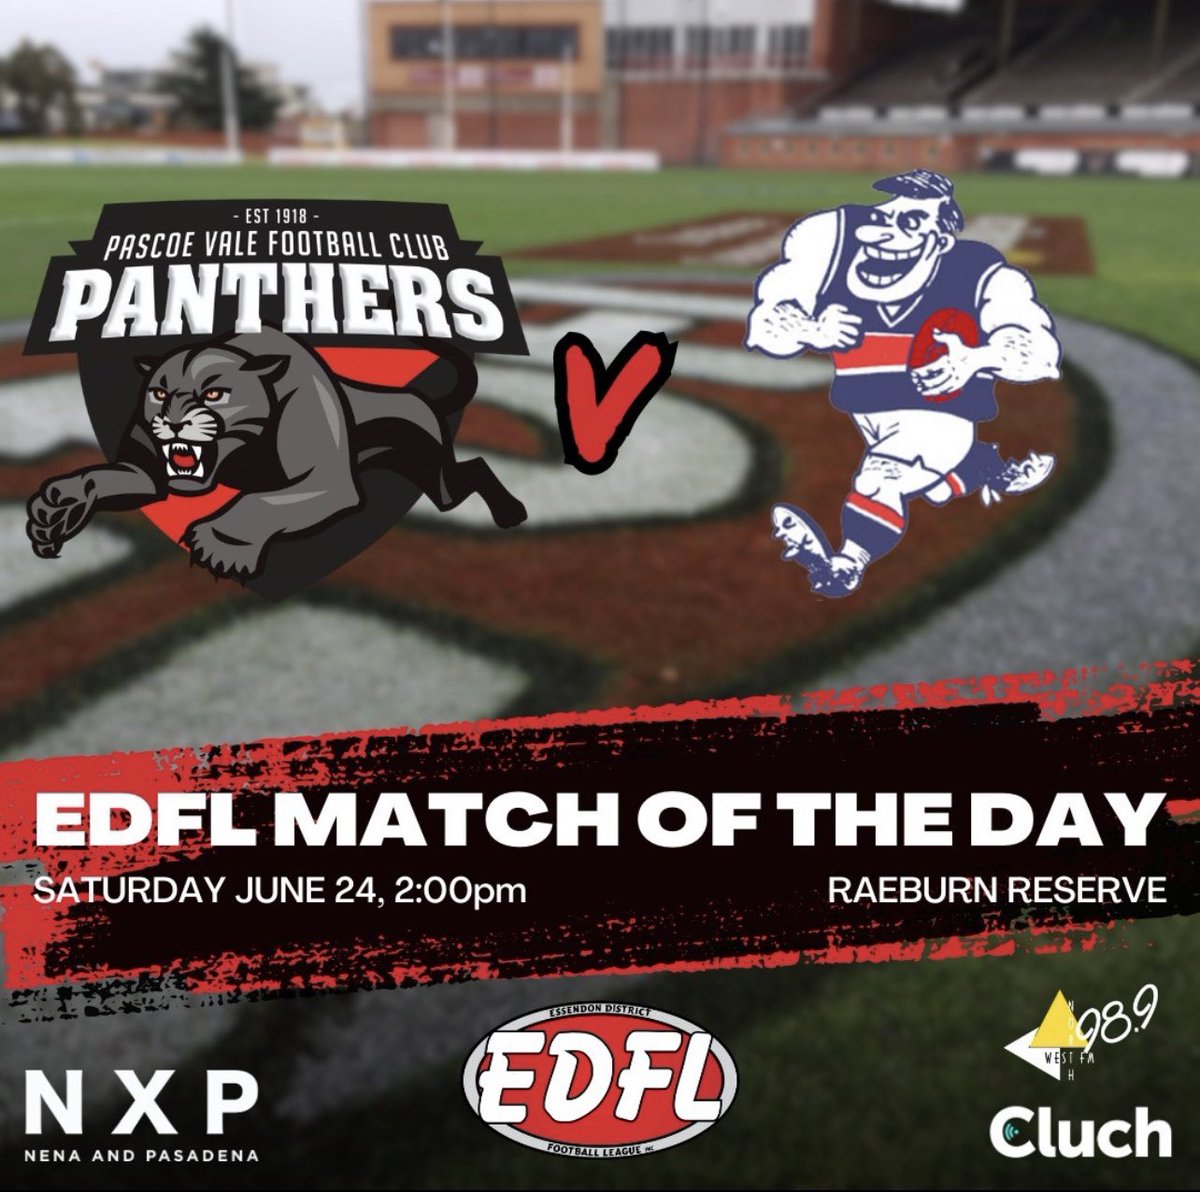 Can’t wait to get stuck into this one tomorrow!! @paccopanthers 2nd 8-1 v @KeilorFC 1st 9-0 

Will @MickMCGU34 men stay undefeated or will Digby Morrell’s Panthers take down the undefeated Keilor?  

Join me for all the action live simulcast via @CluchTV & @NorthWestFMMelb